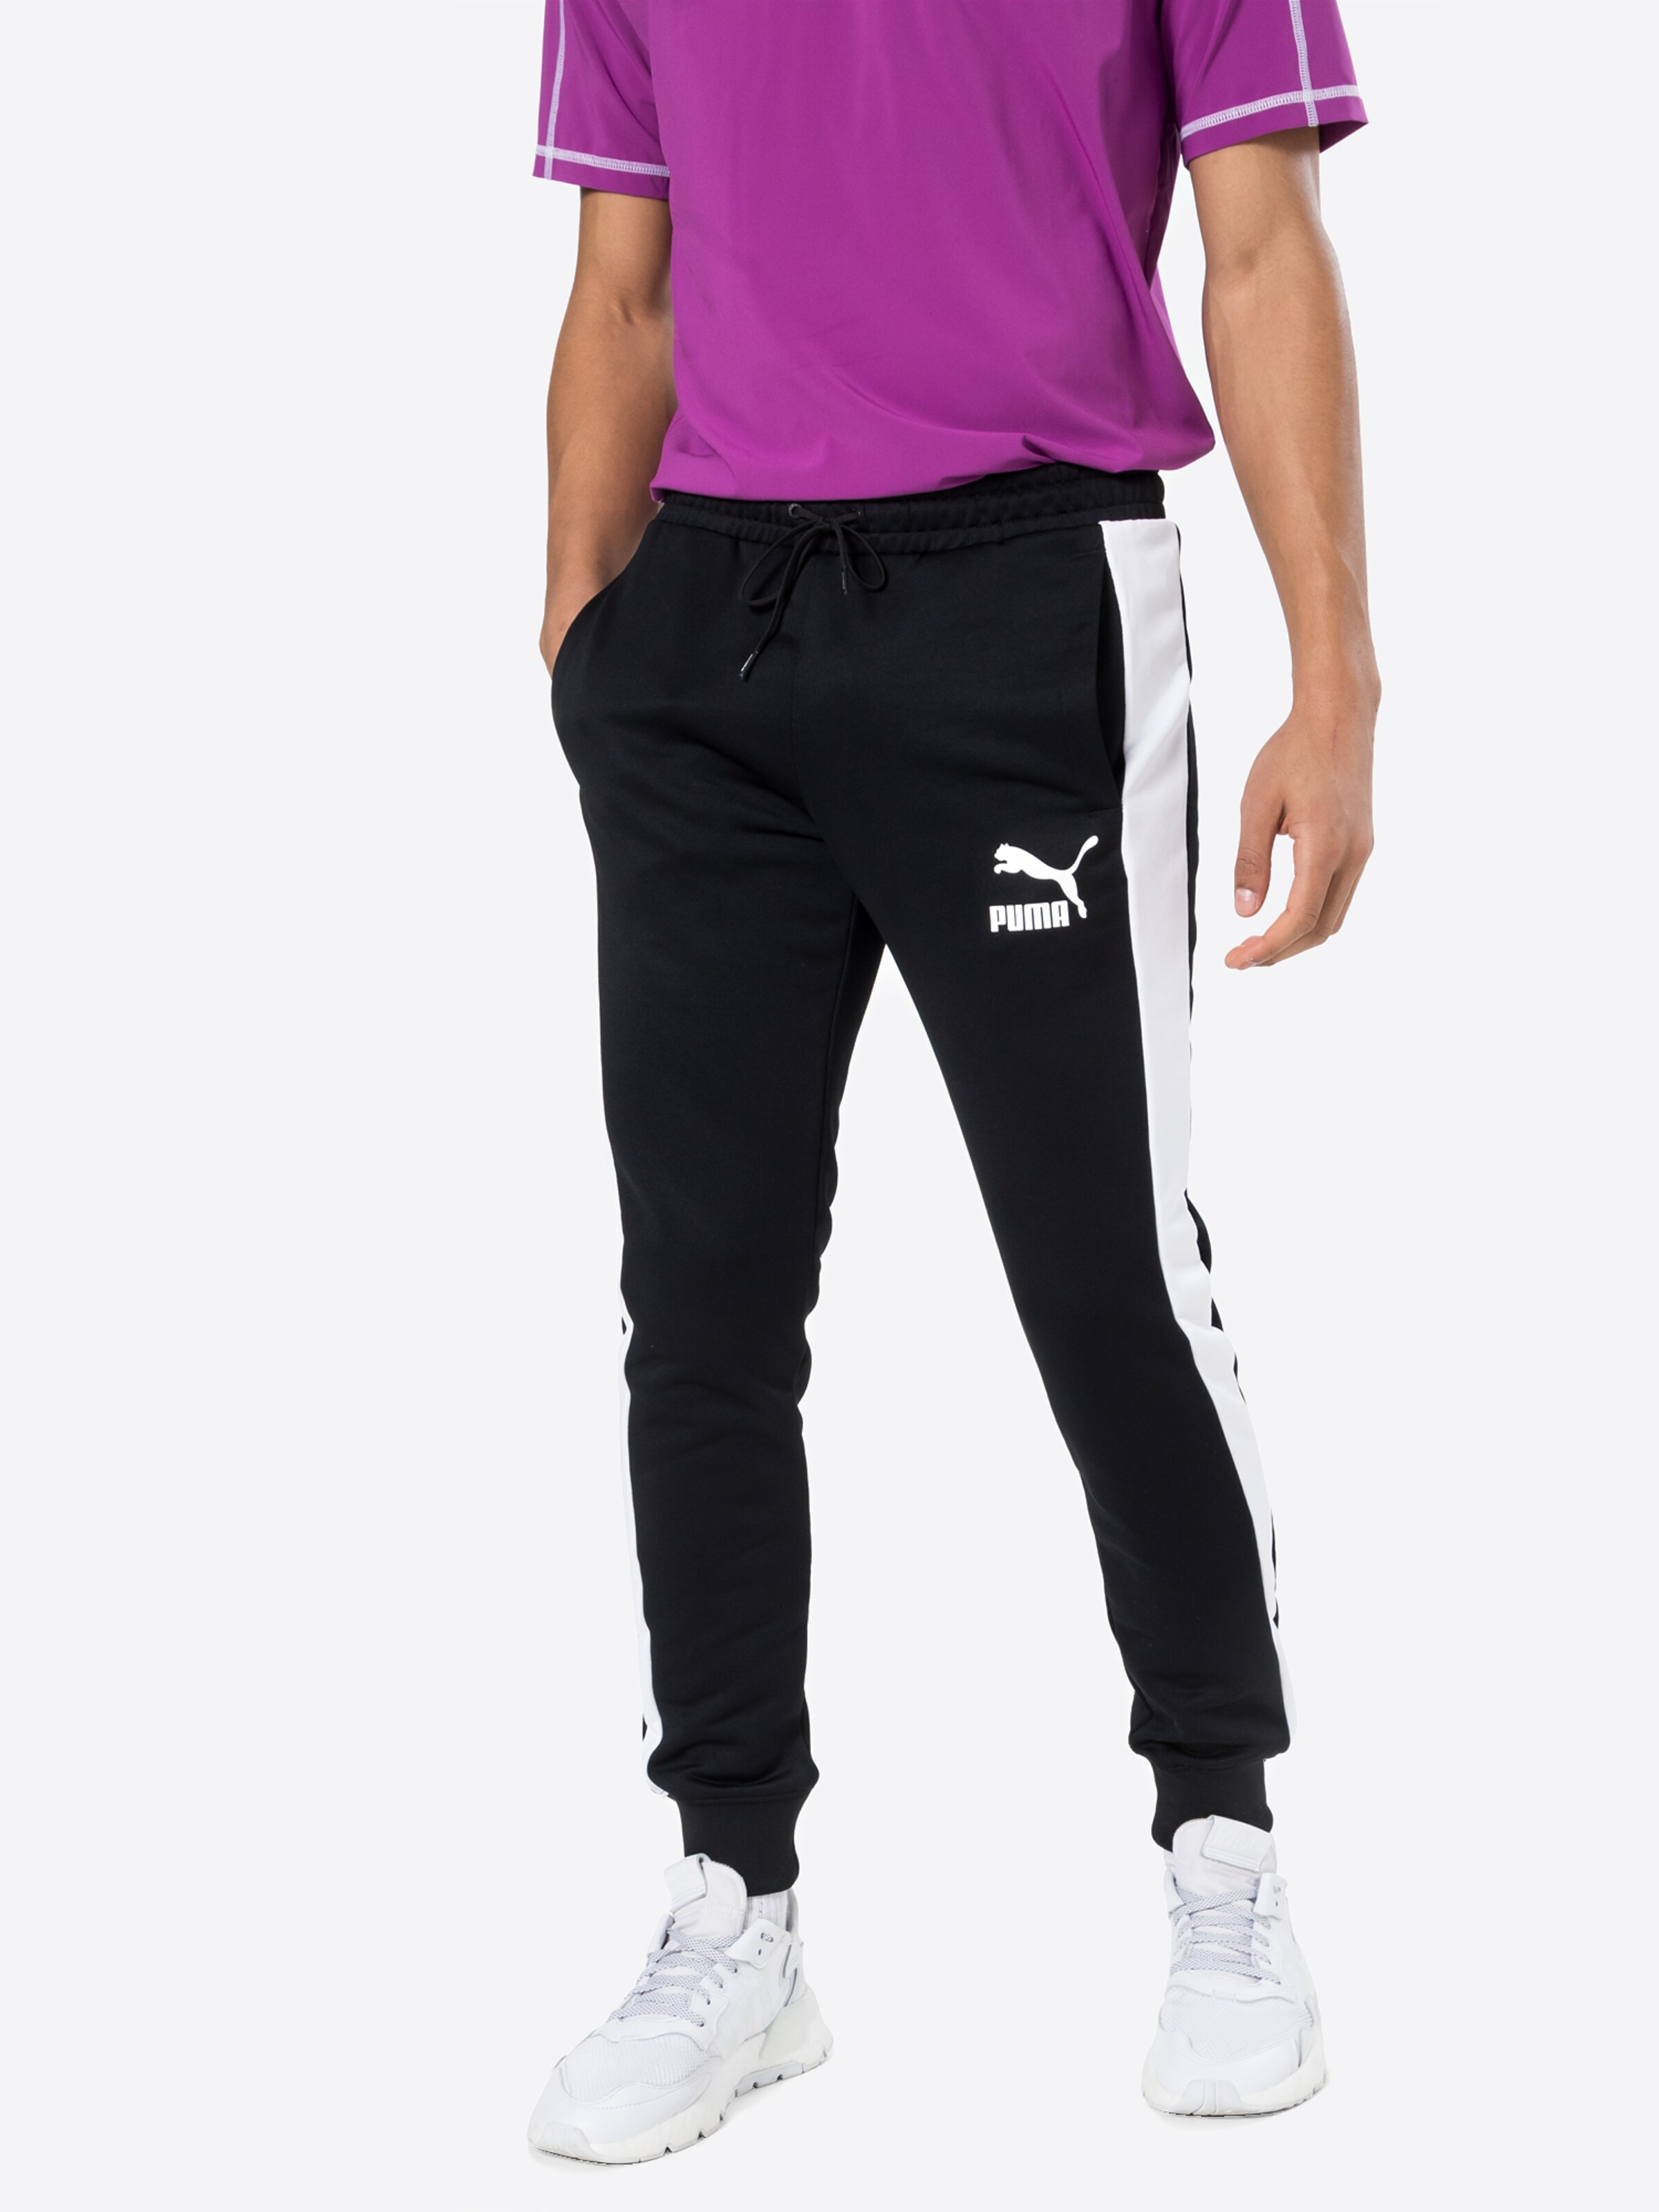 Buy Puma Track Pants Online In India